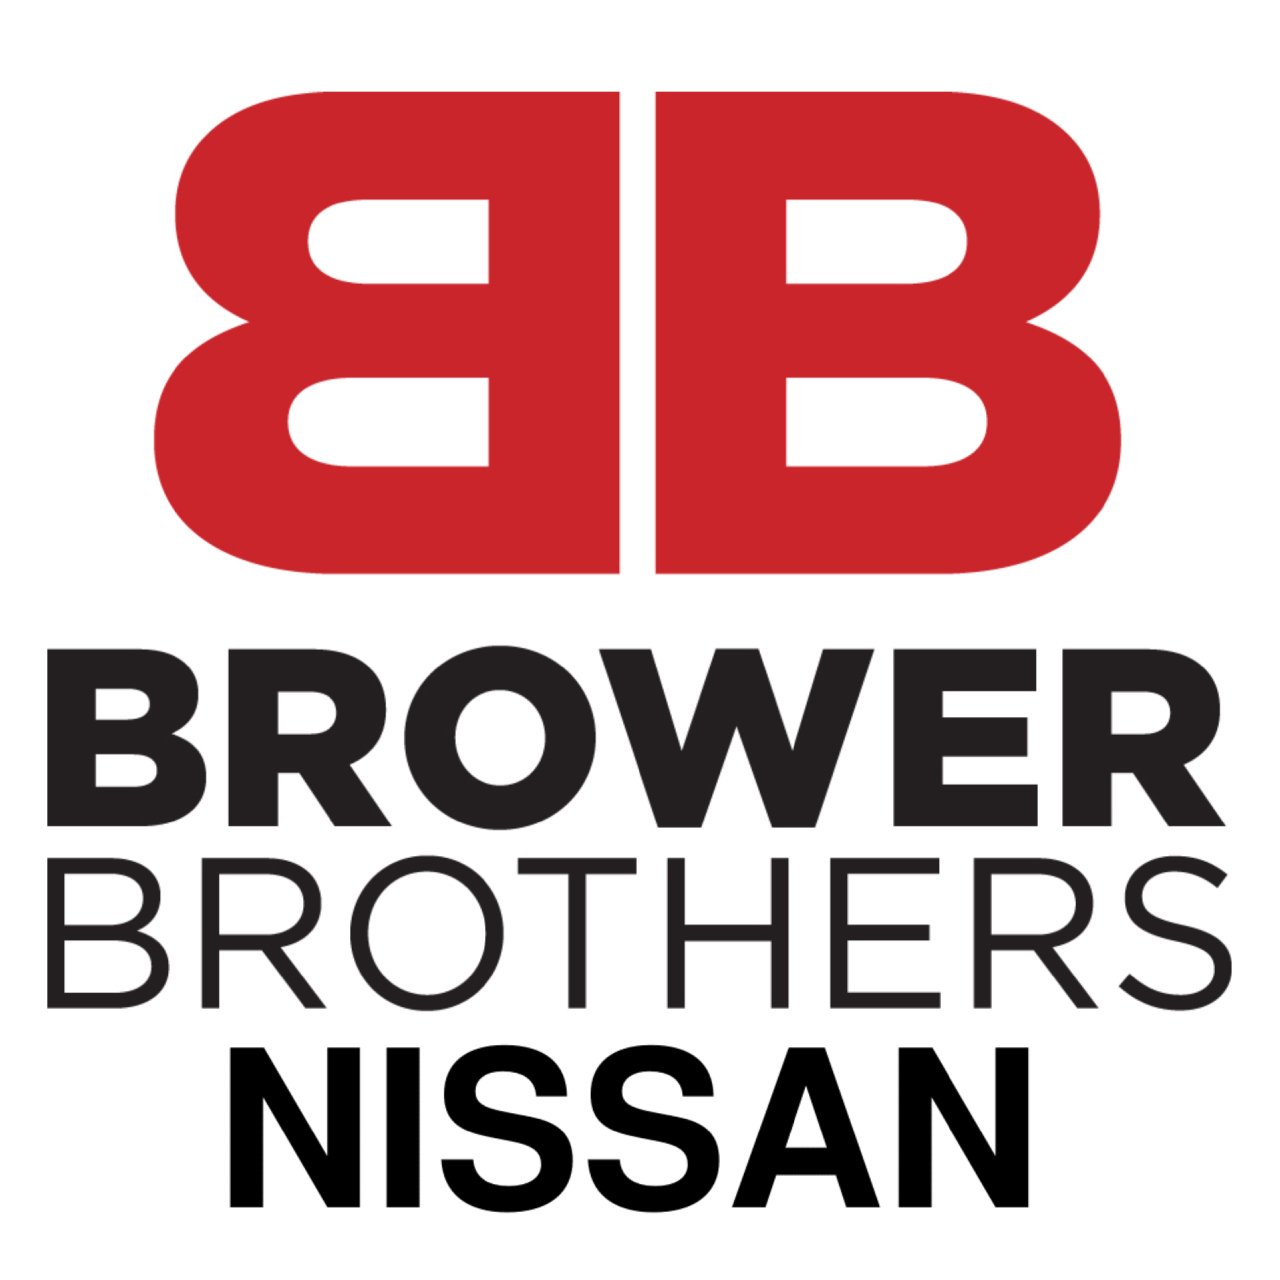 www.browerbrothersnissan.com